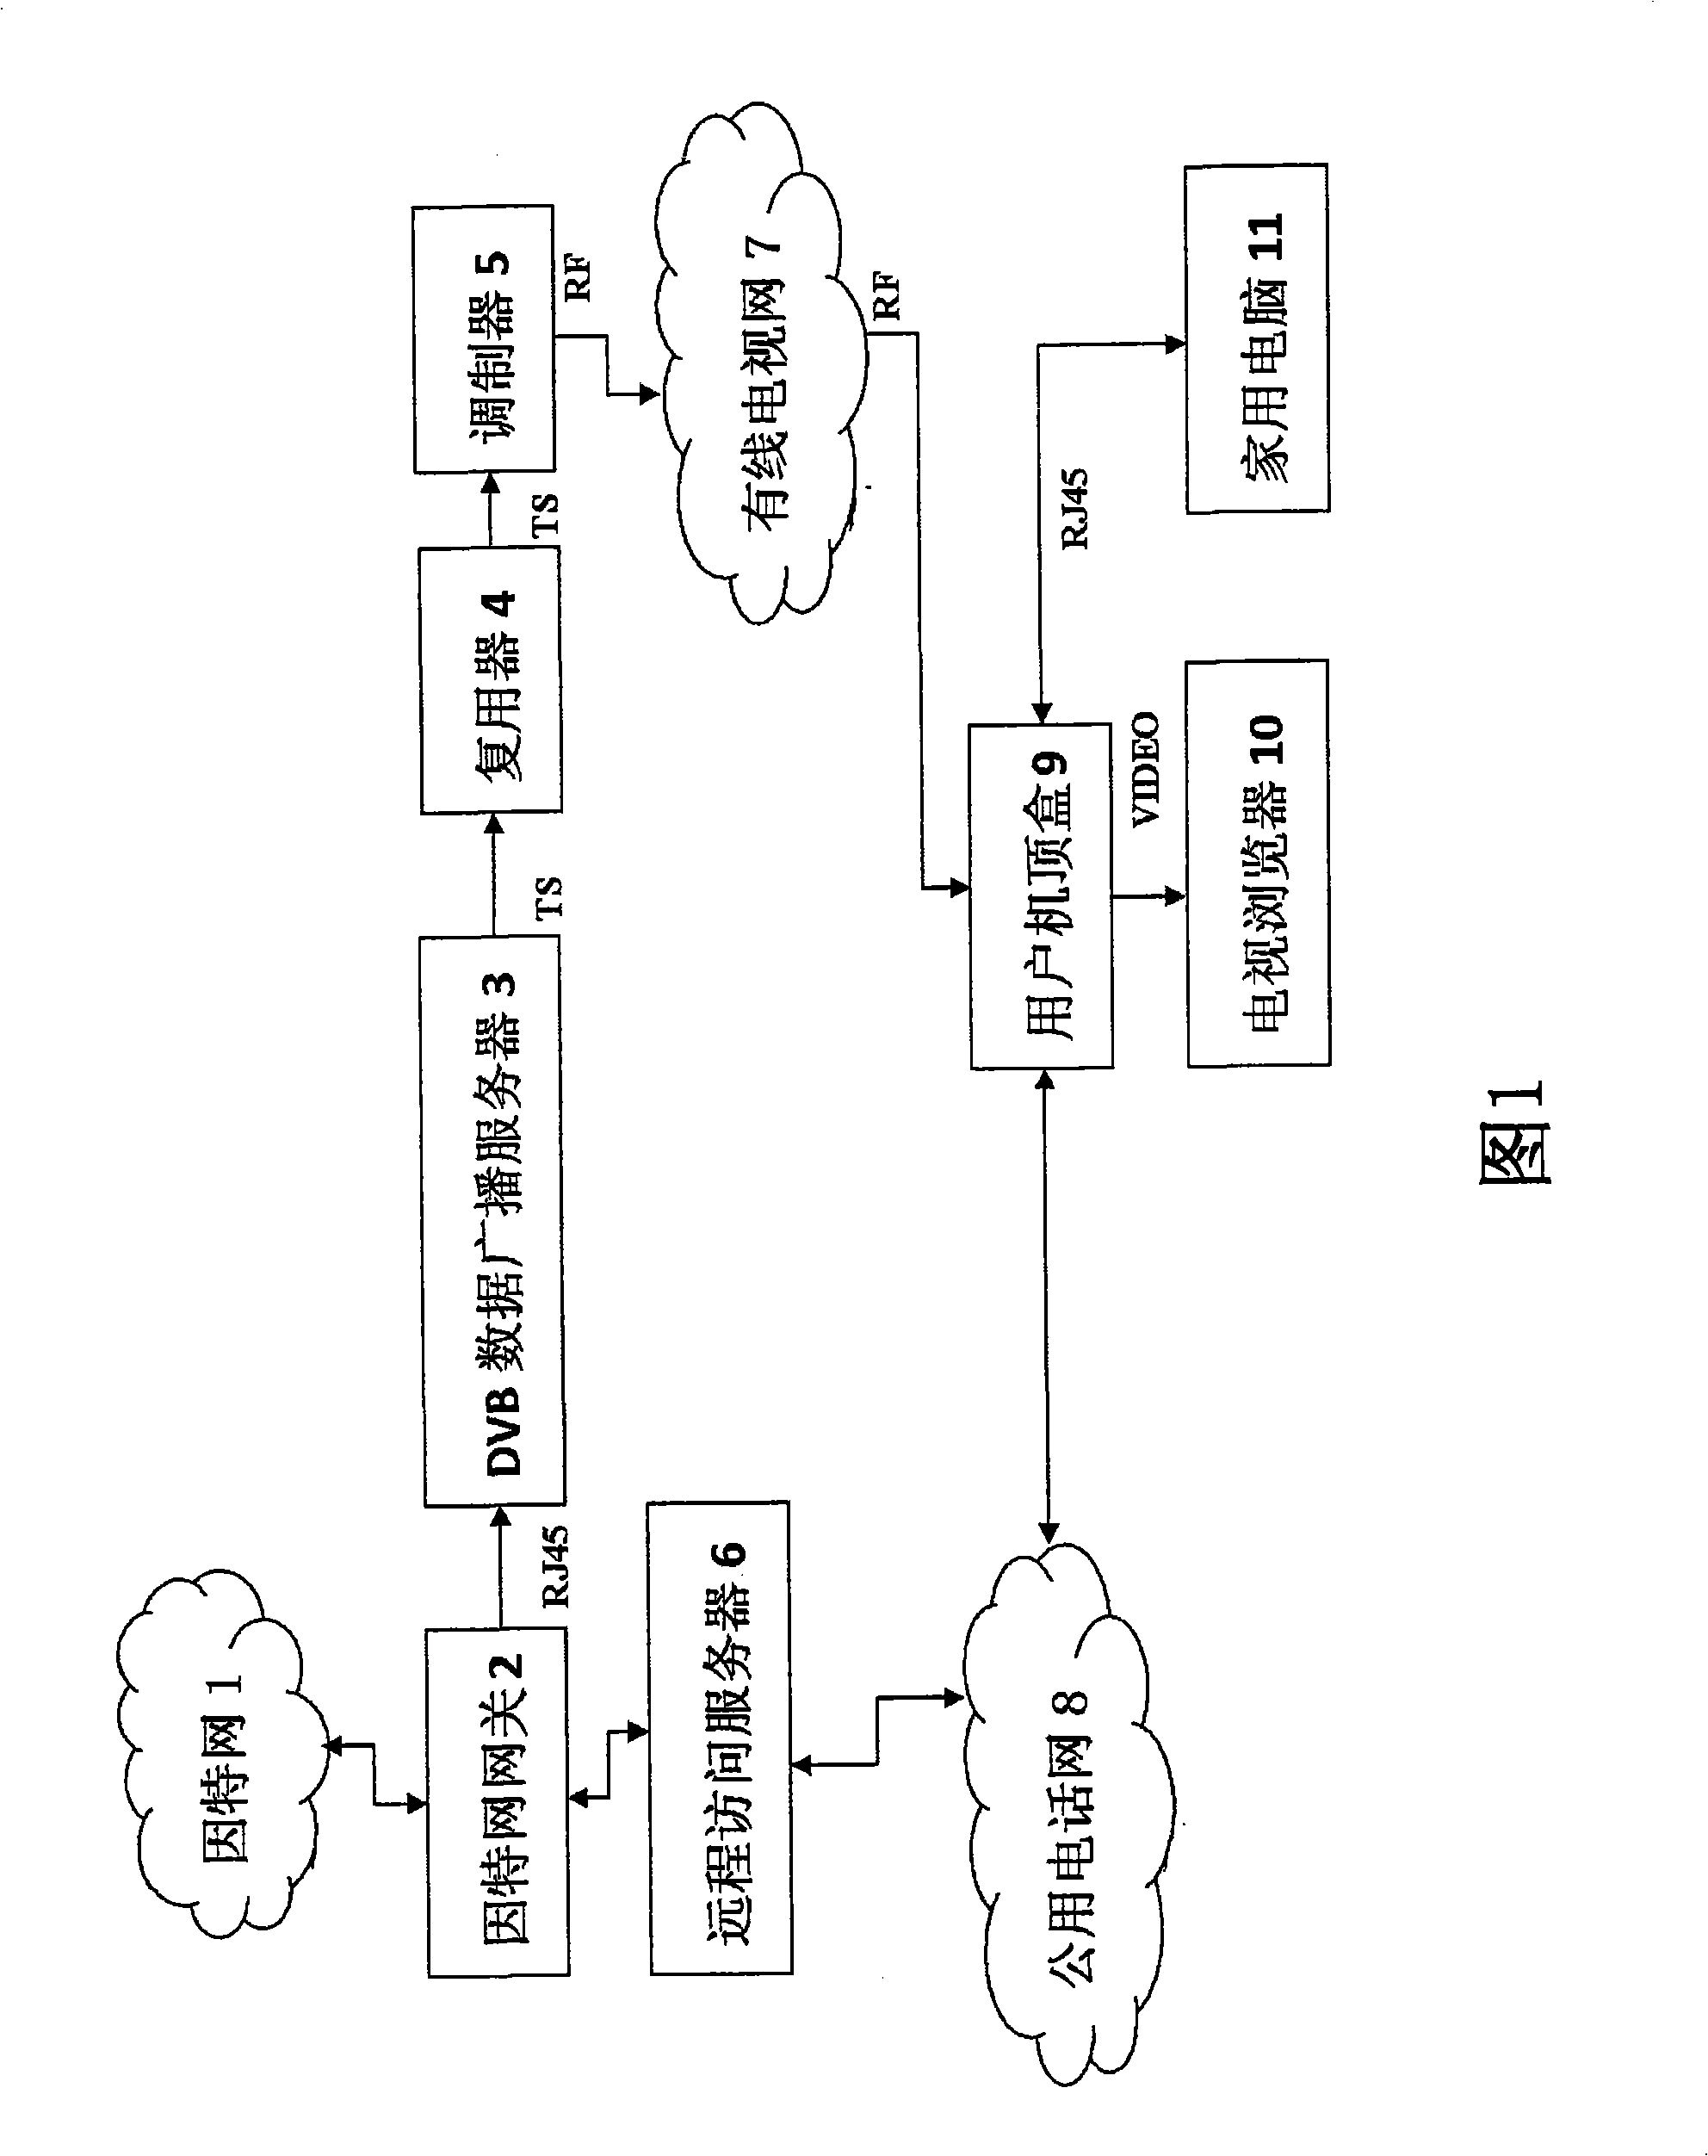 Method for receiving video data and system for distributing video data